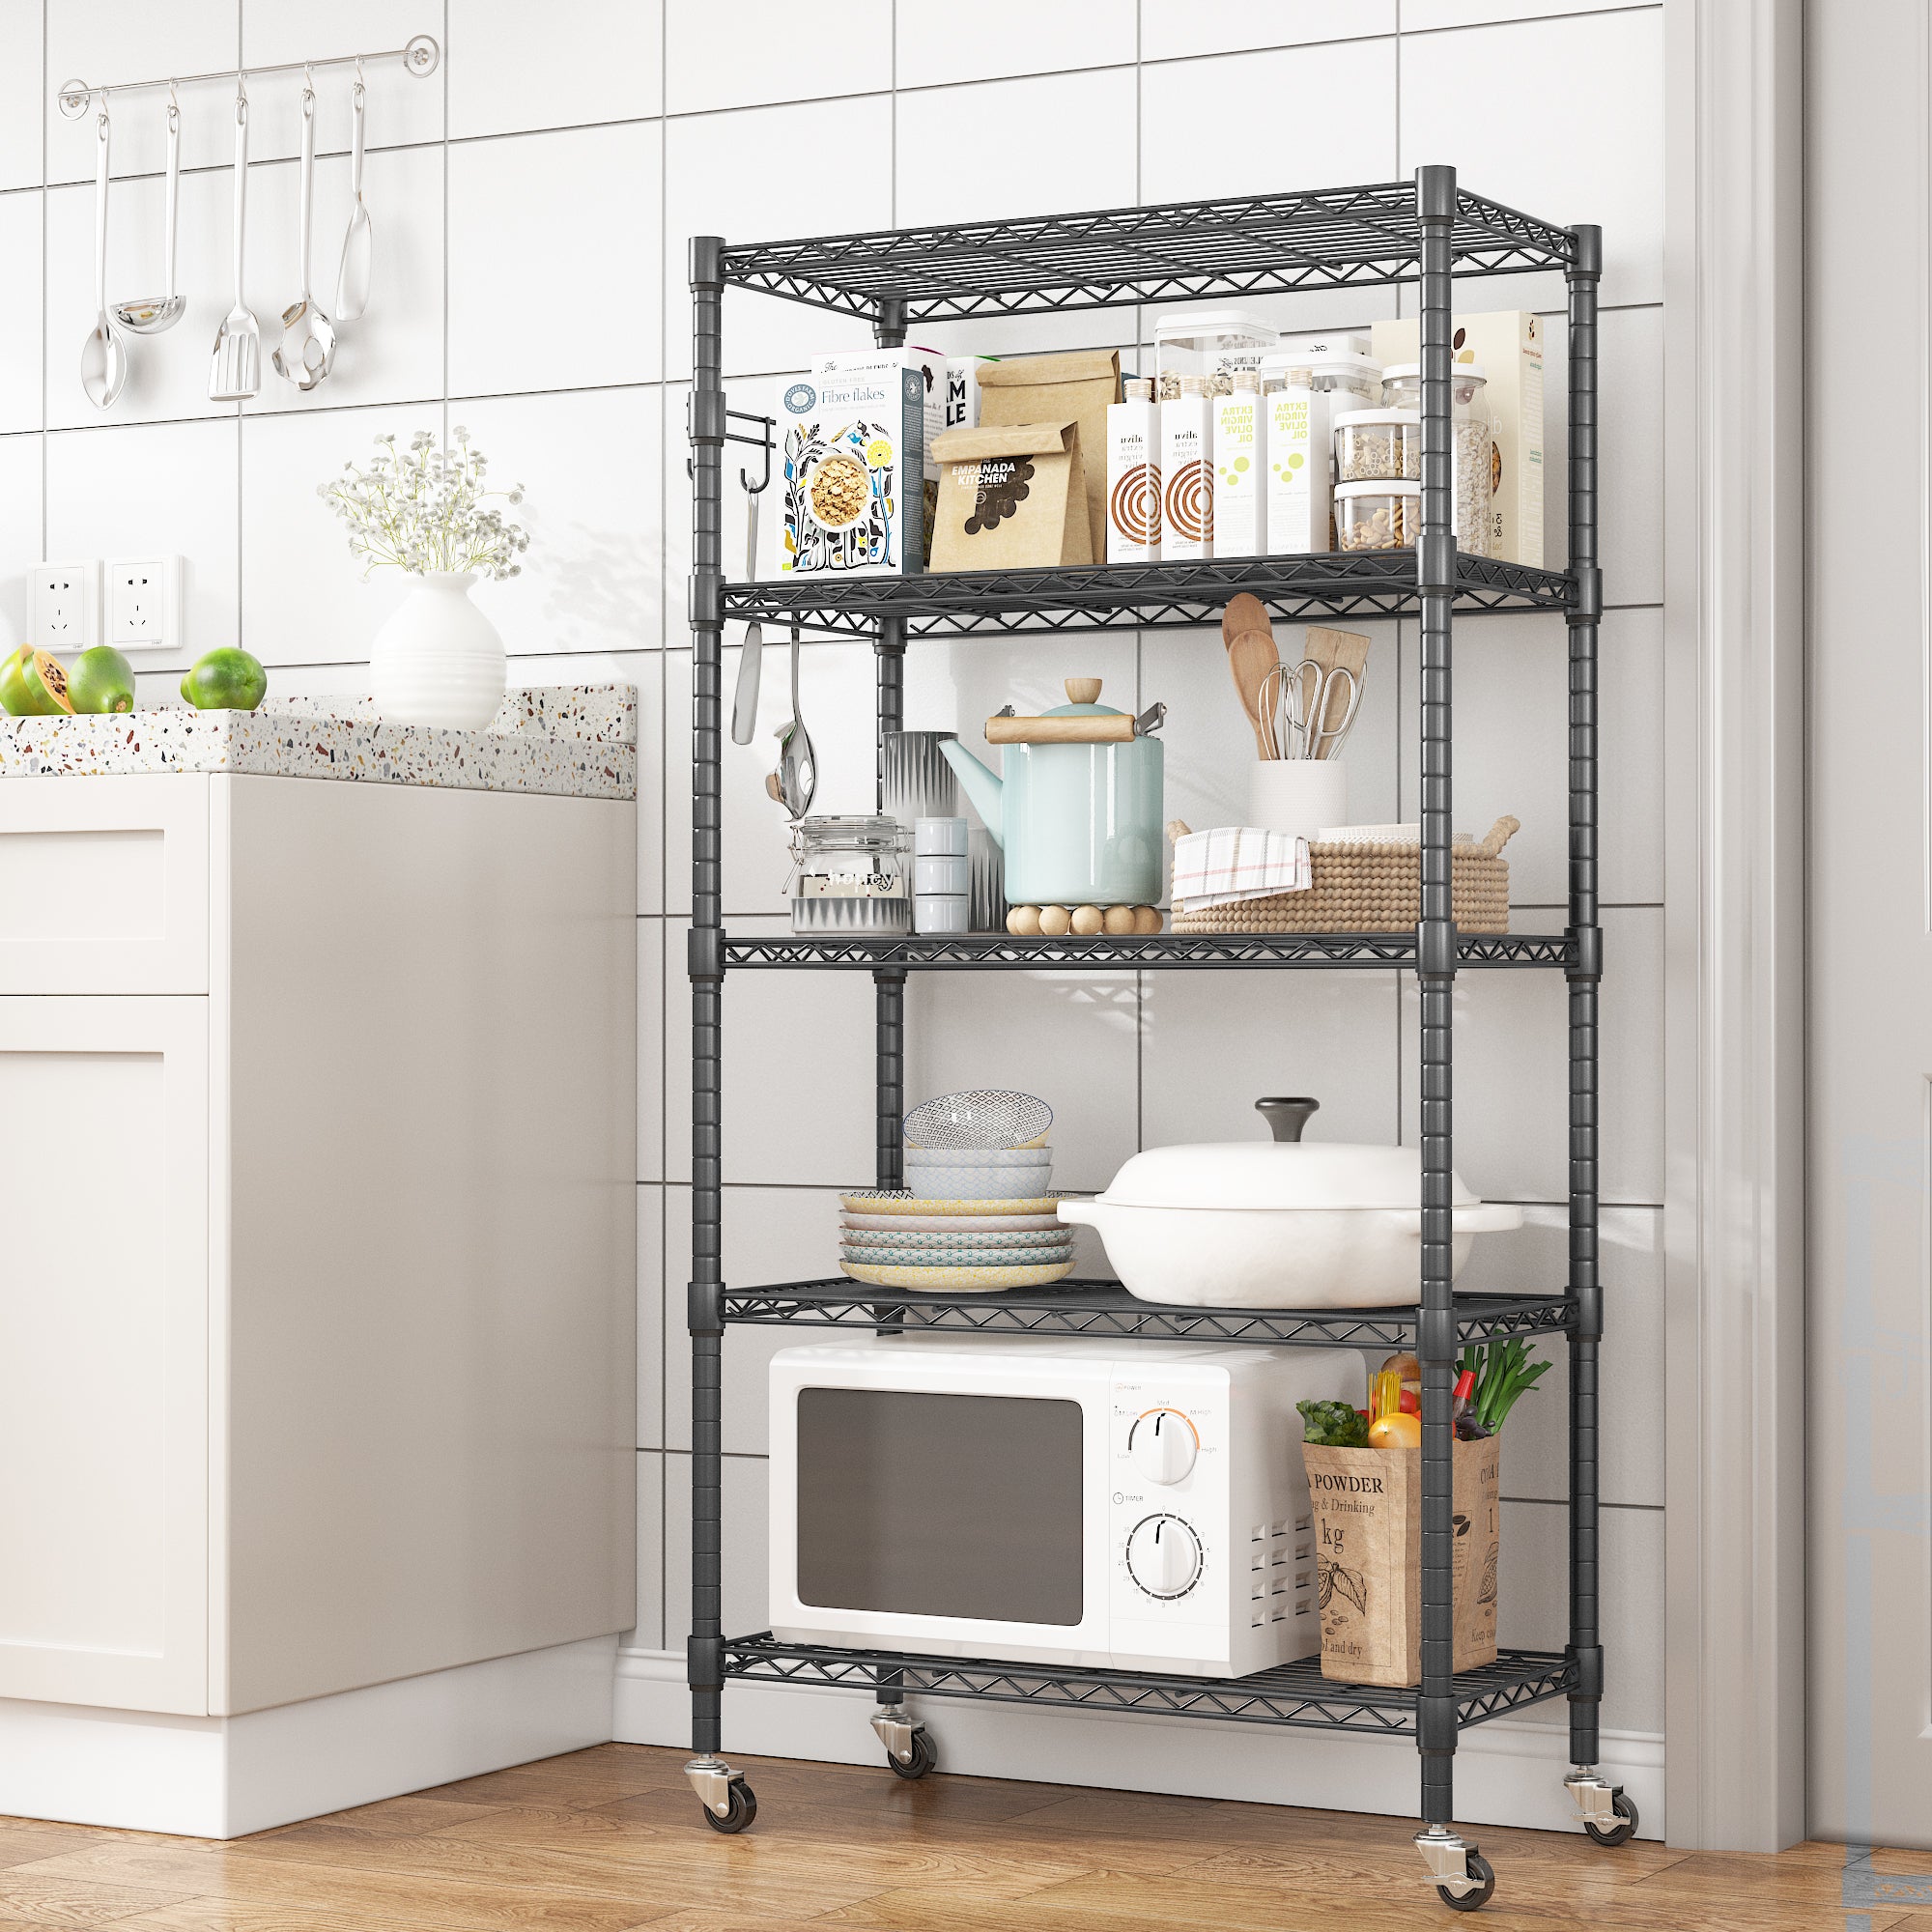 Kitchen Shelves Shelf Rack Stainless Steel Shelving and Organizer Units 4/5  Tier